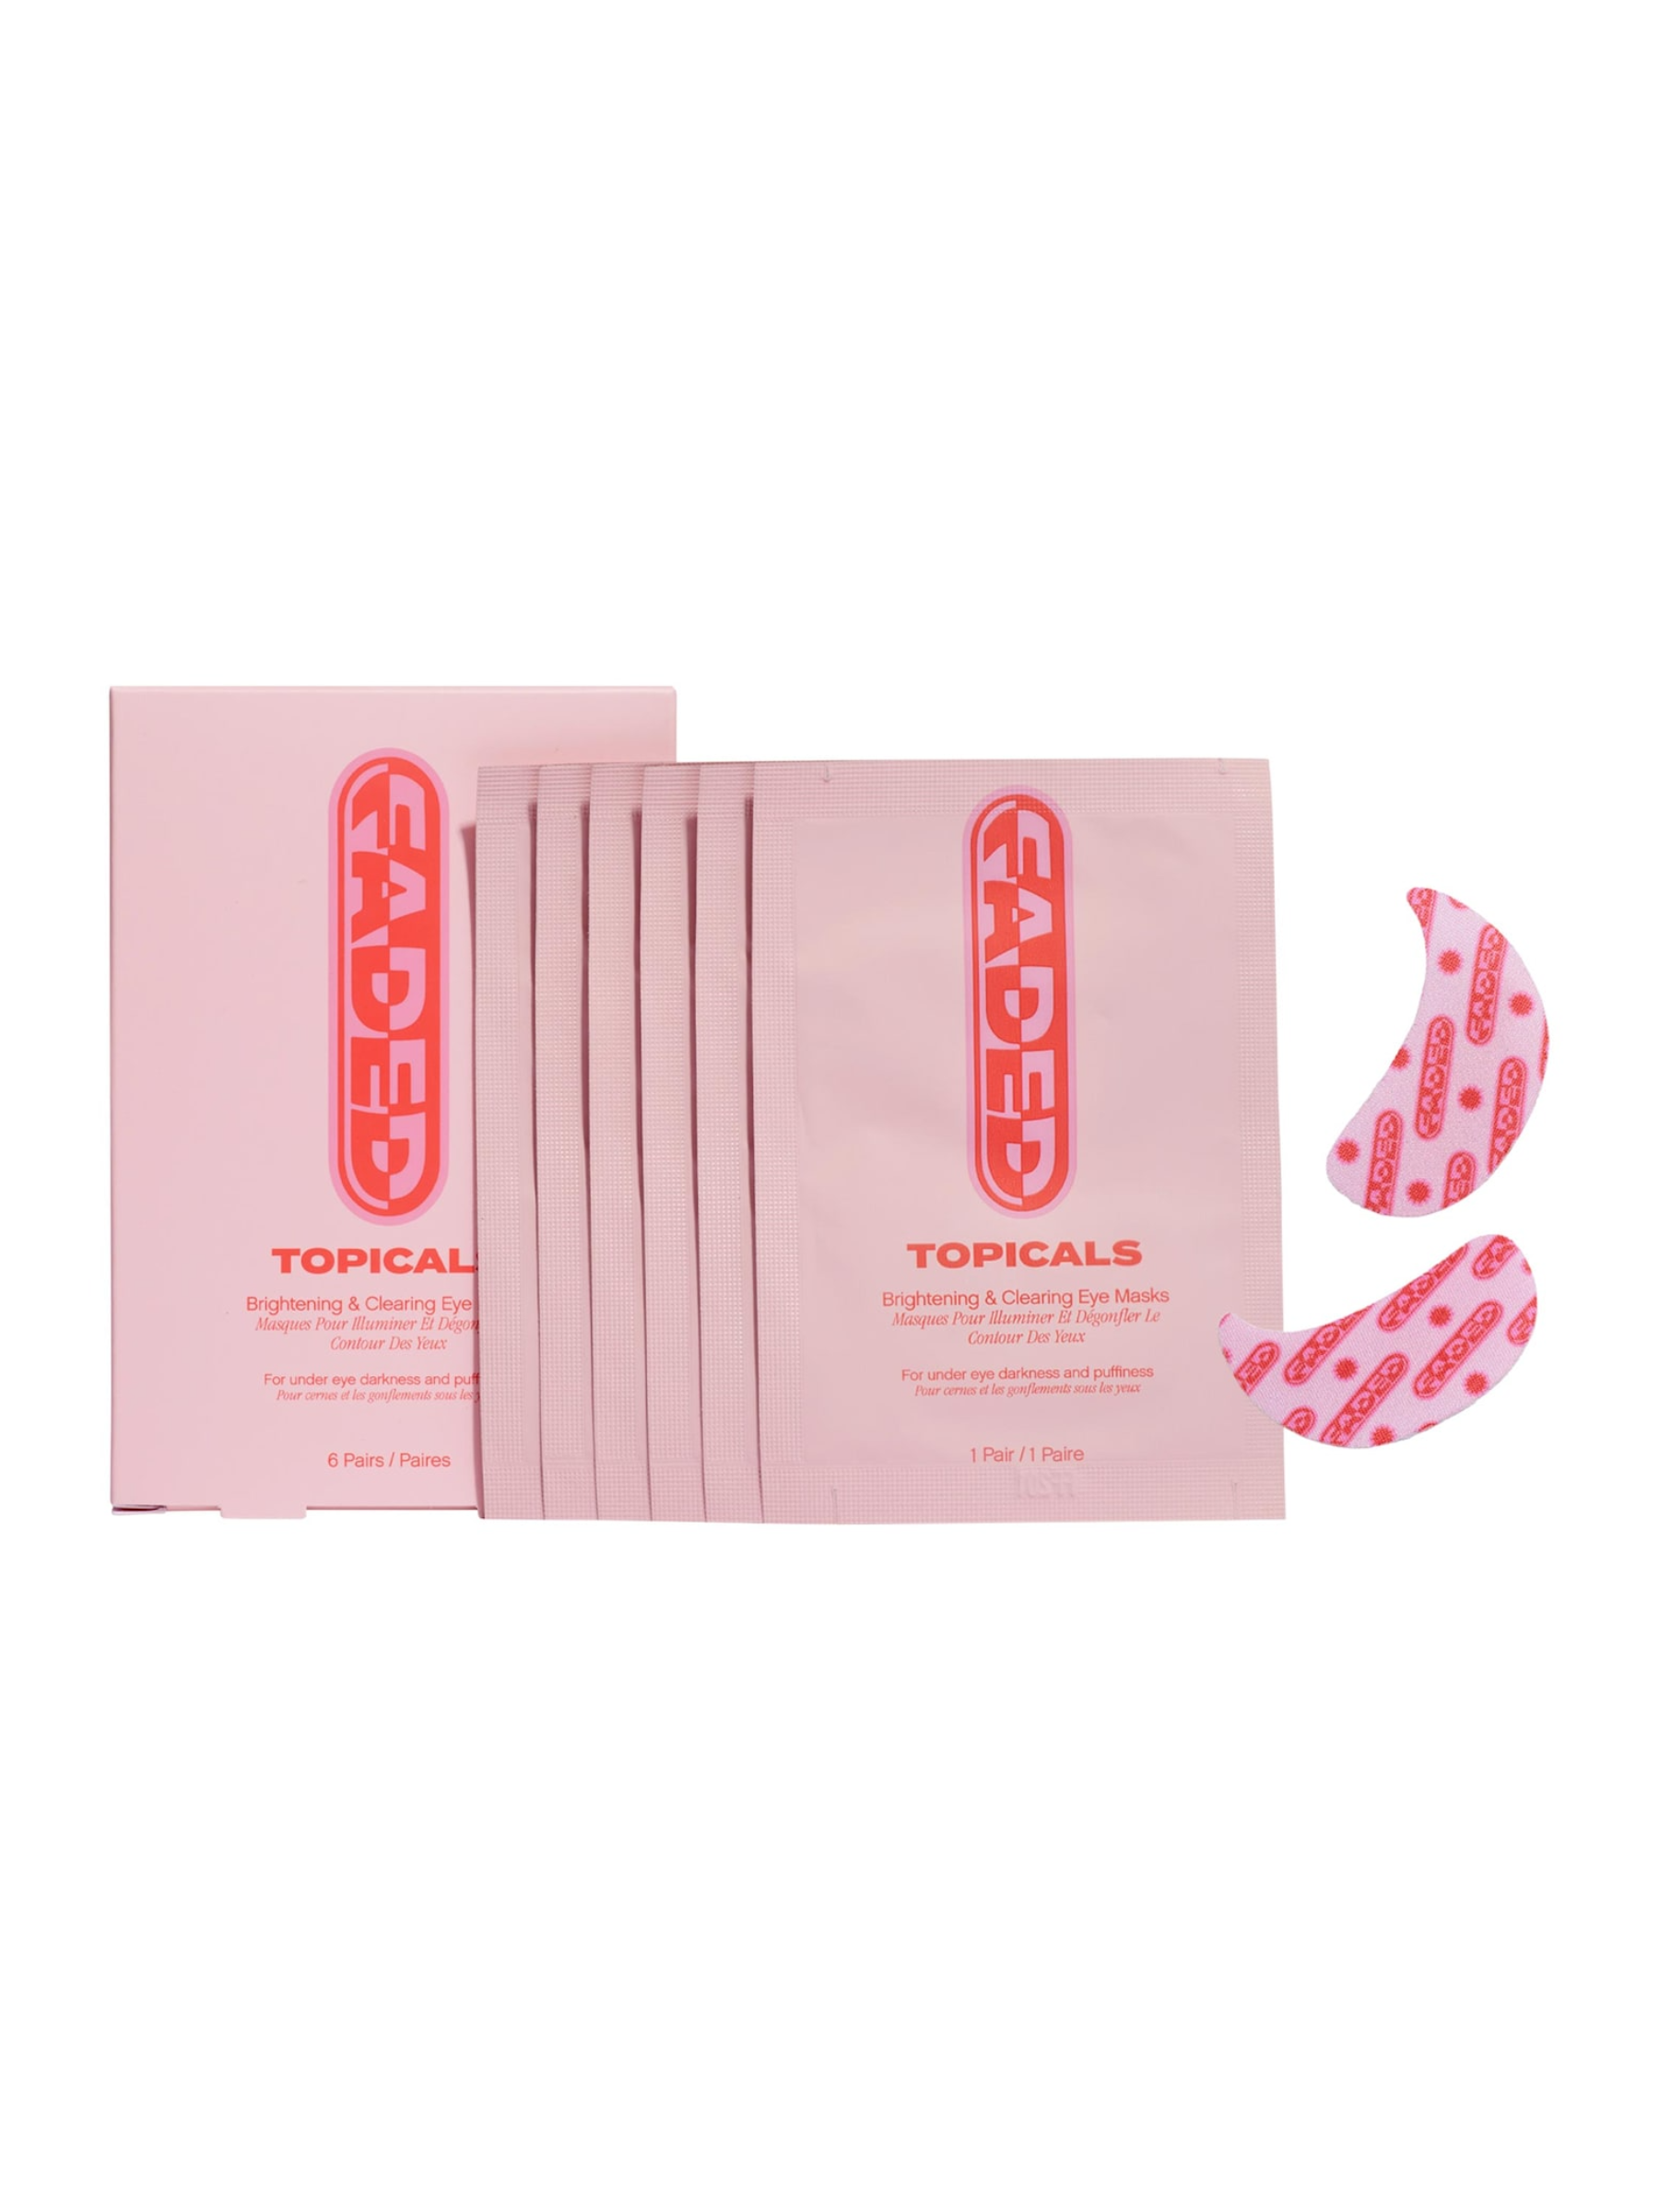 Cooling hydrogel patches will help with dark circles and puffiness and may come in handy as they crank through midterms and college acceptances. $22, Sephora. <a href="https://www.sephora.com/product/faded-eye-masks-P507518?">Get it now!</a><p>Sign up for today’s biggest stories, from pop culture to politics.</p><a href="https://www.glamour.com/newsletter/news?sourceCode=msnsend">Sign Up</a>